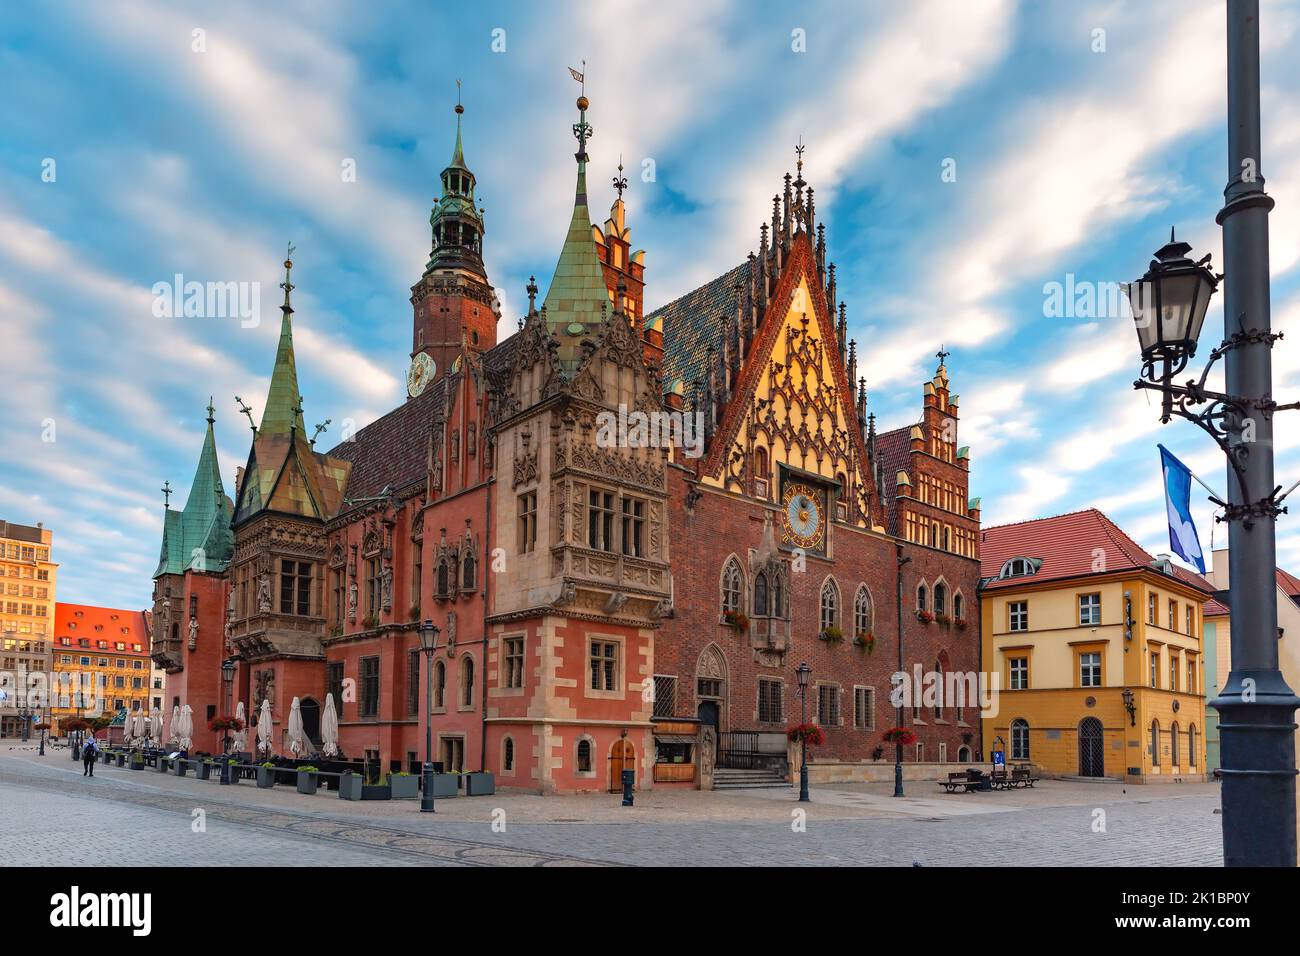 Multicolored traditional historical houses and City Hall on Market square at sunset, Old Town of Wroclaw, Poland Stock Photo